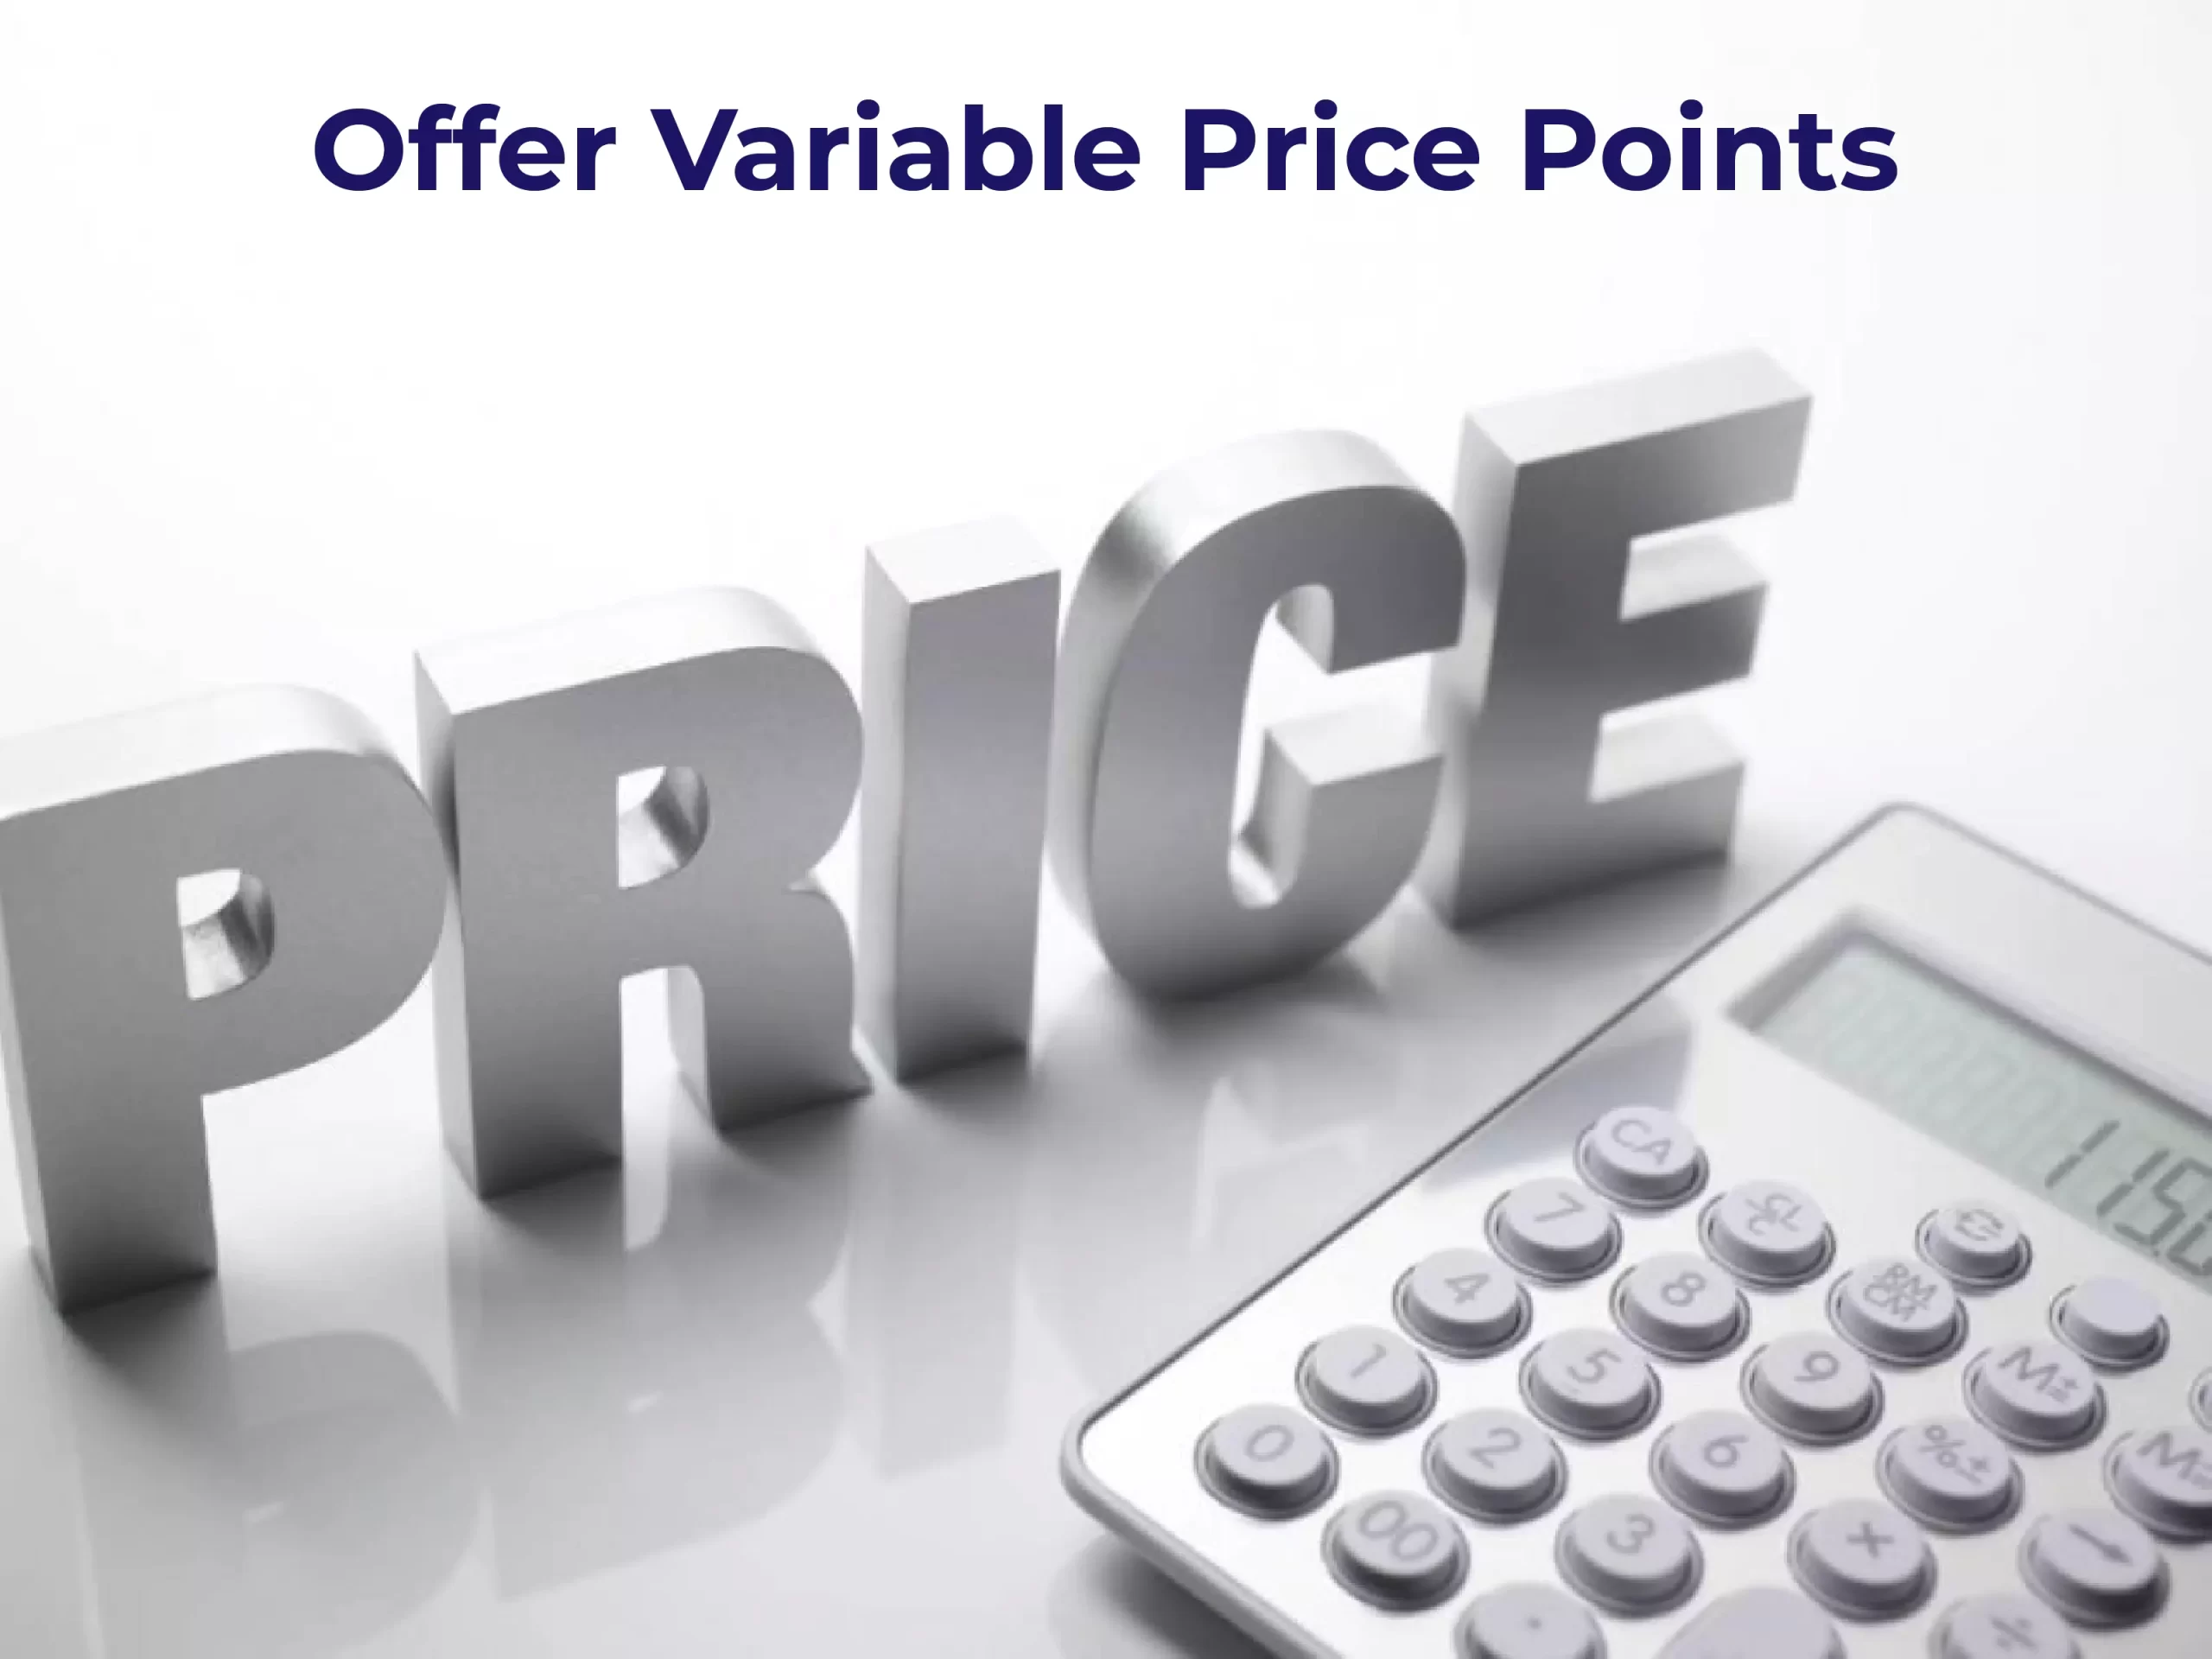 Offer Variable Price Points